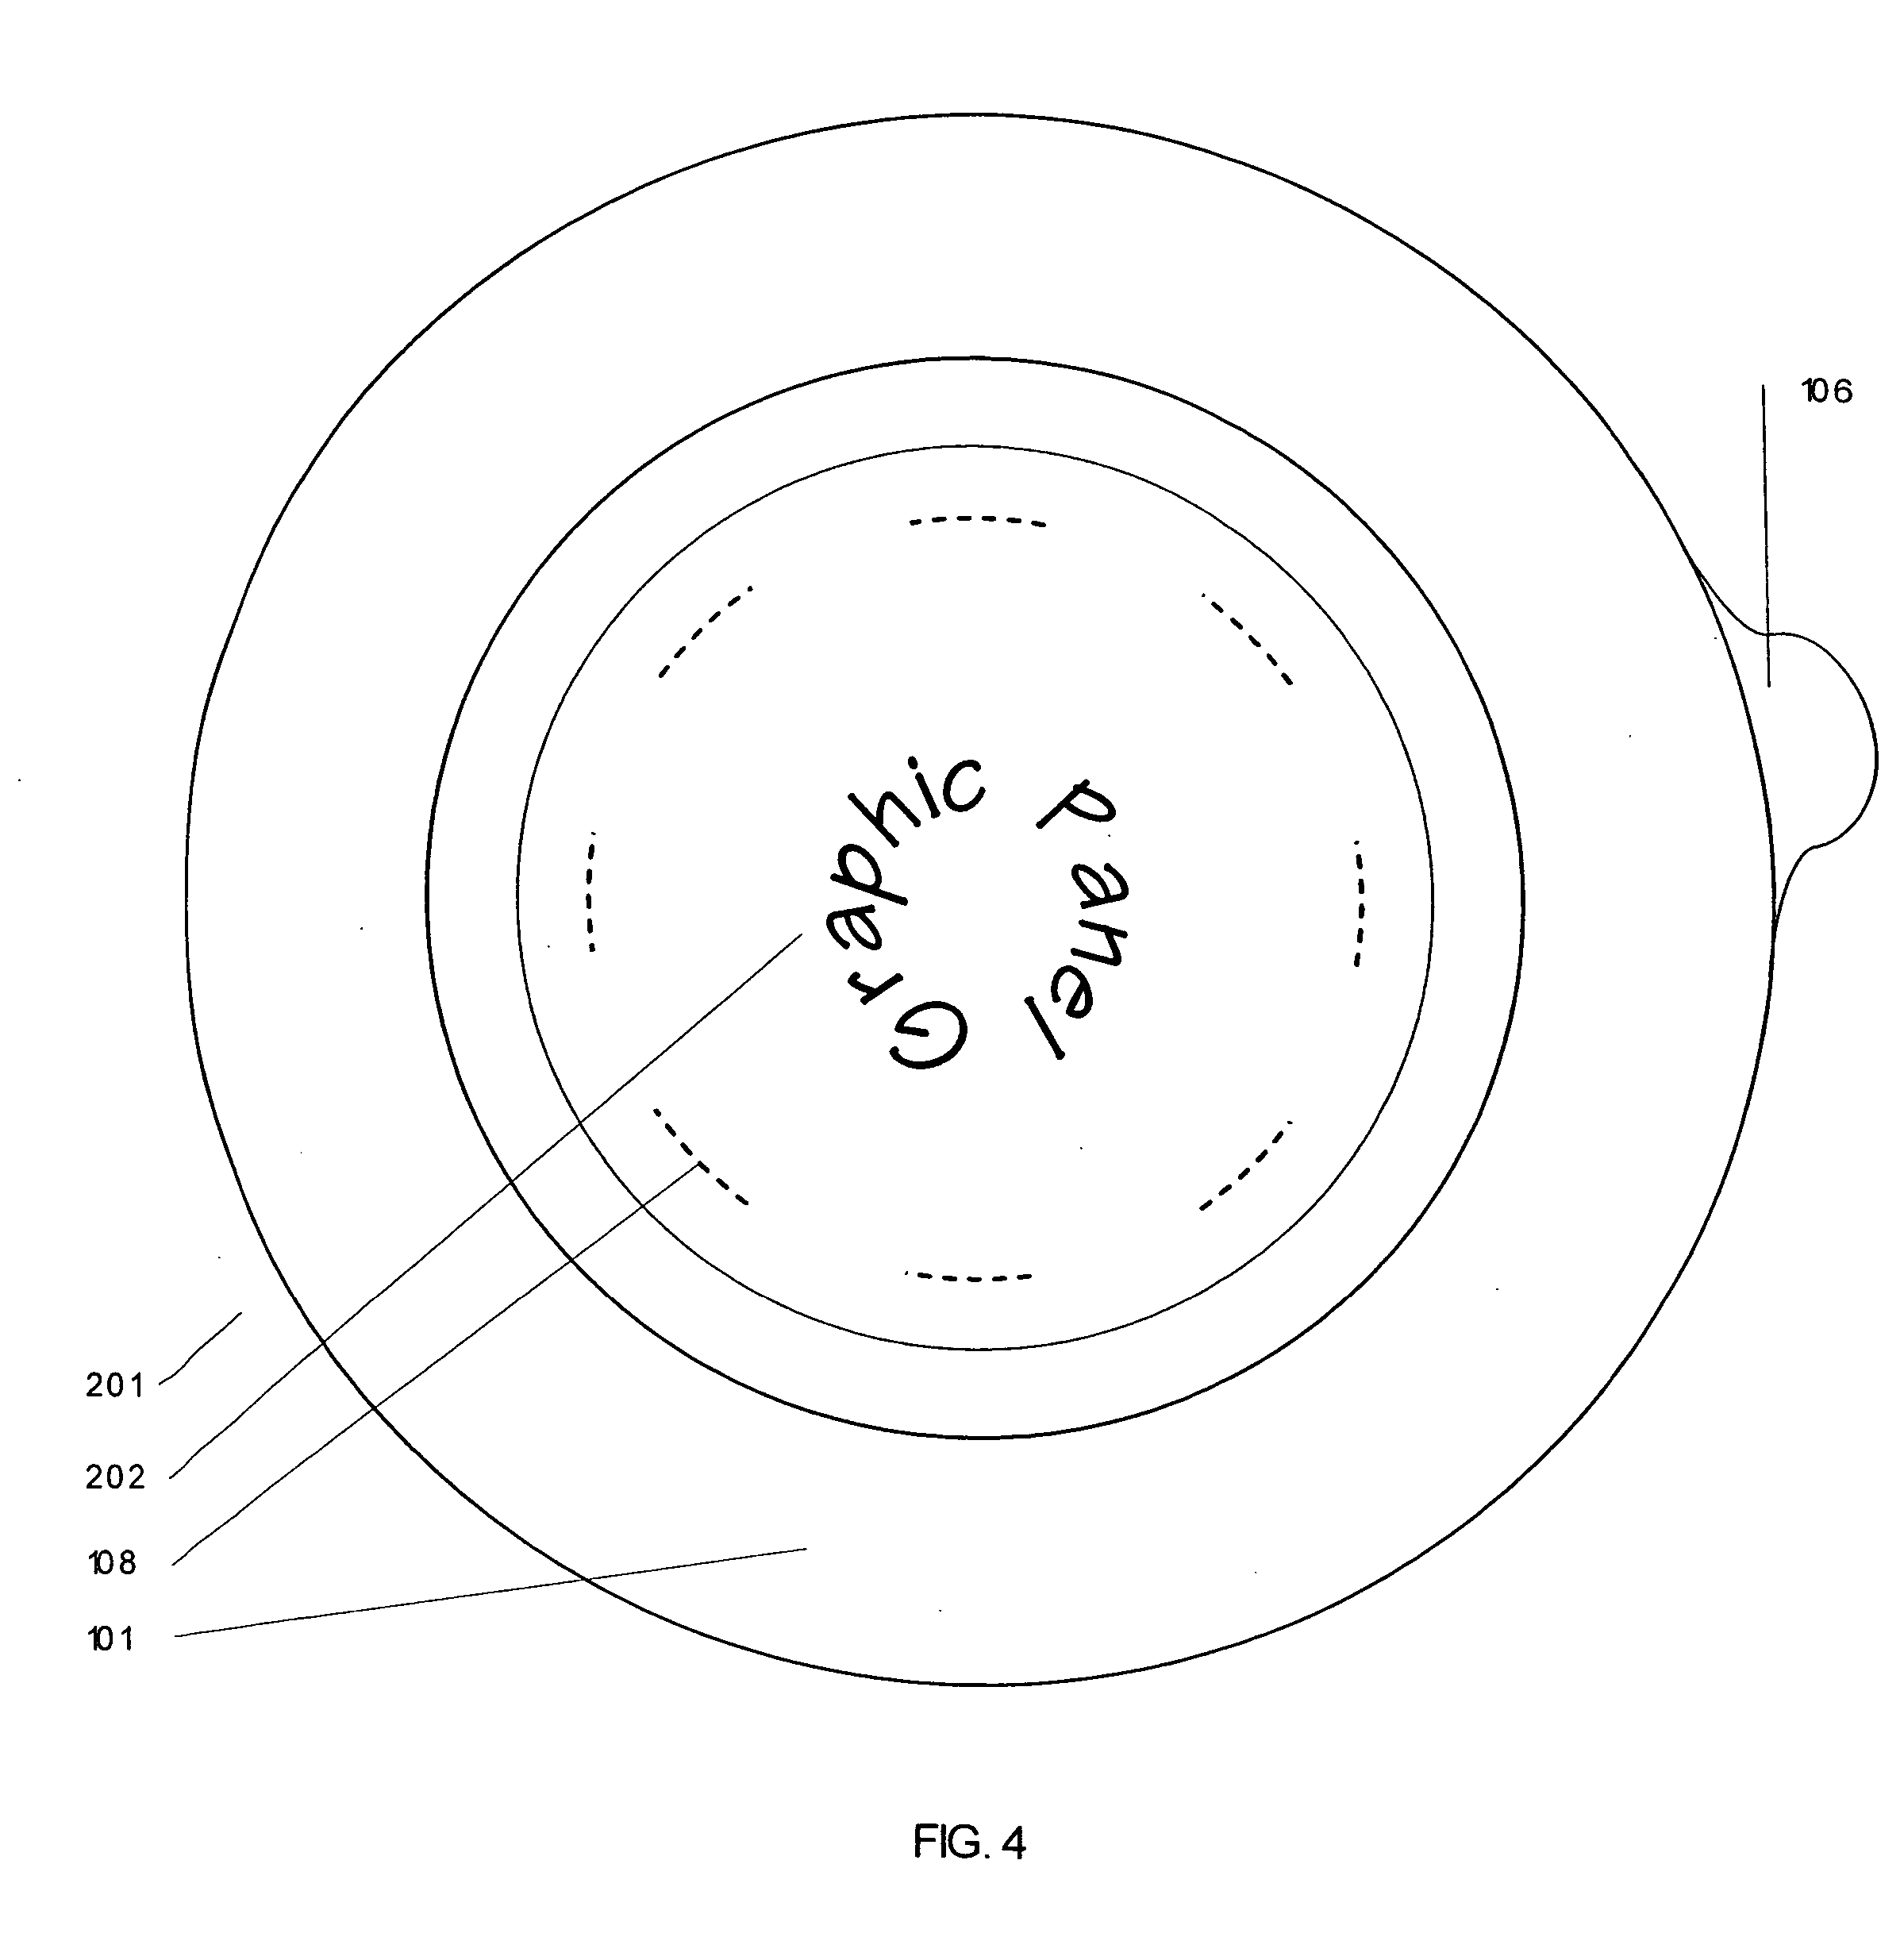 Method and device for pressurizing containers